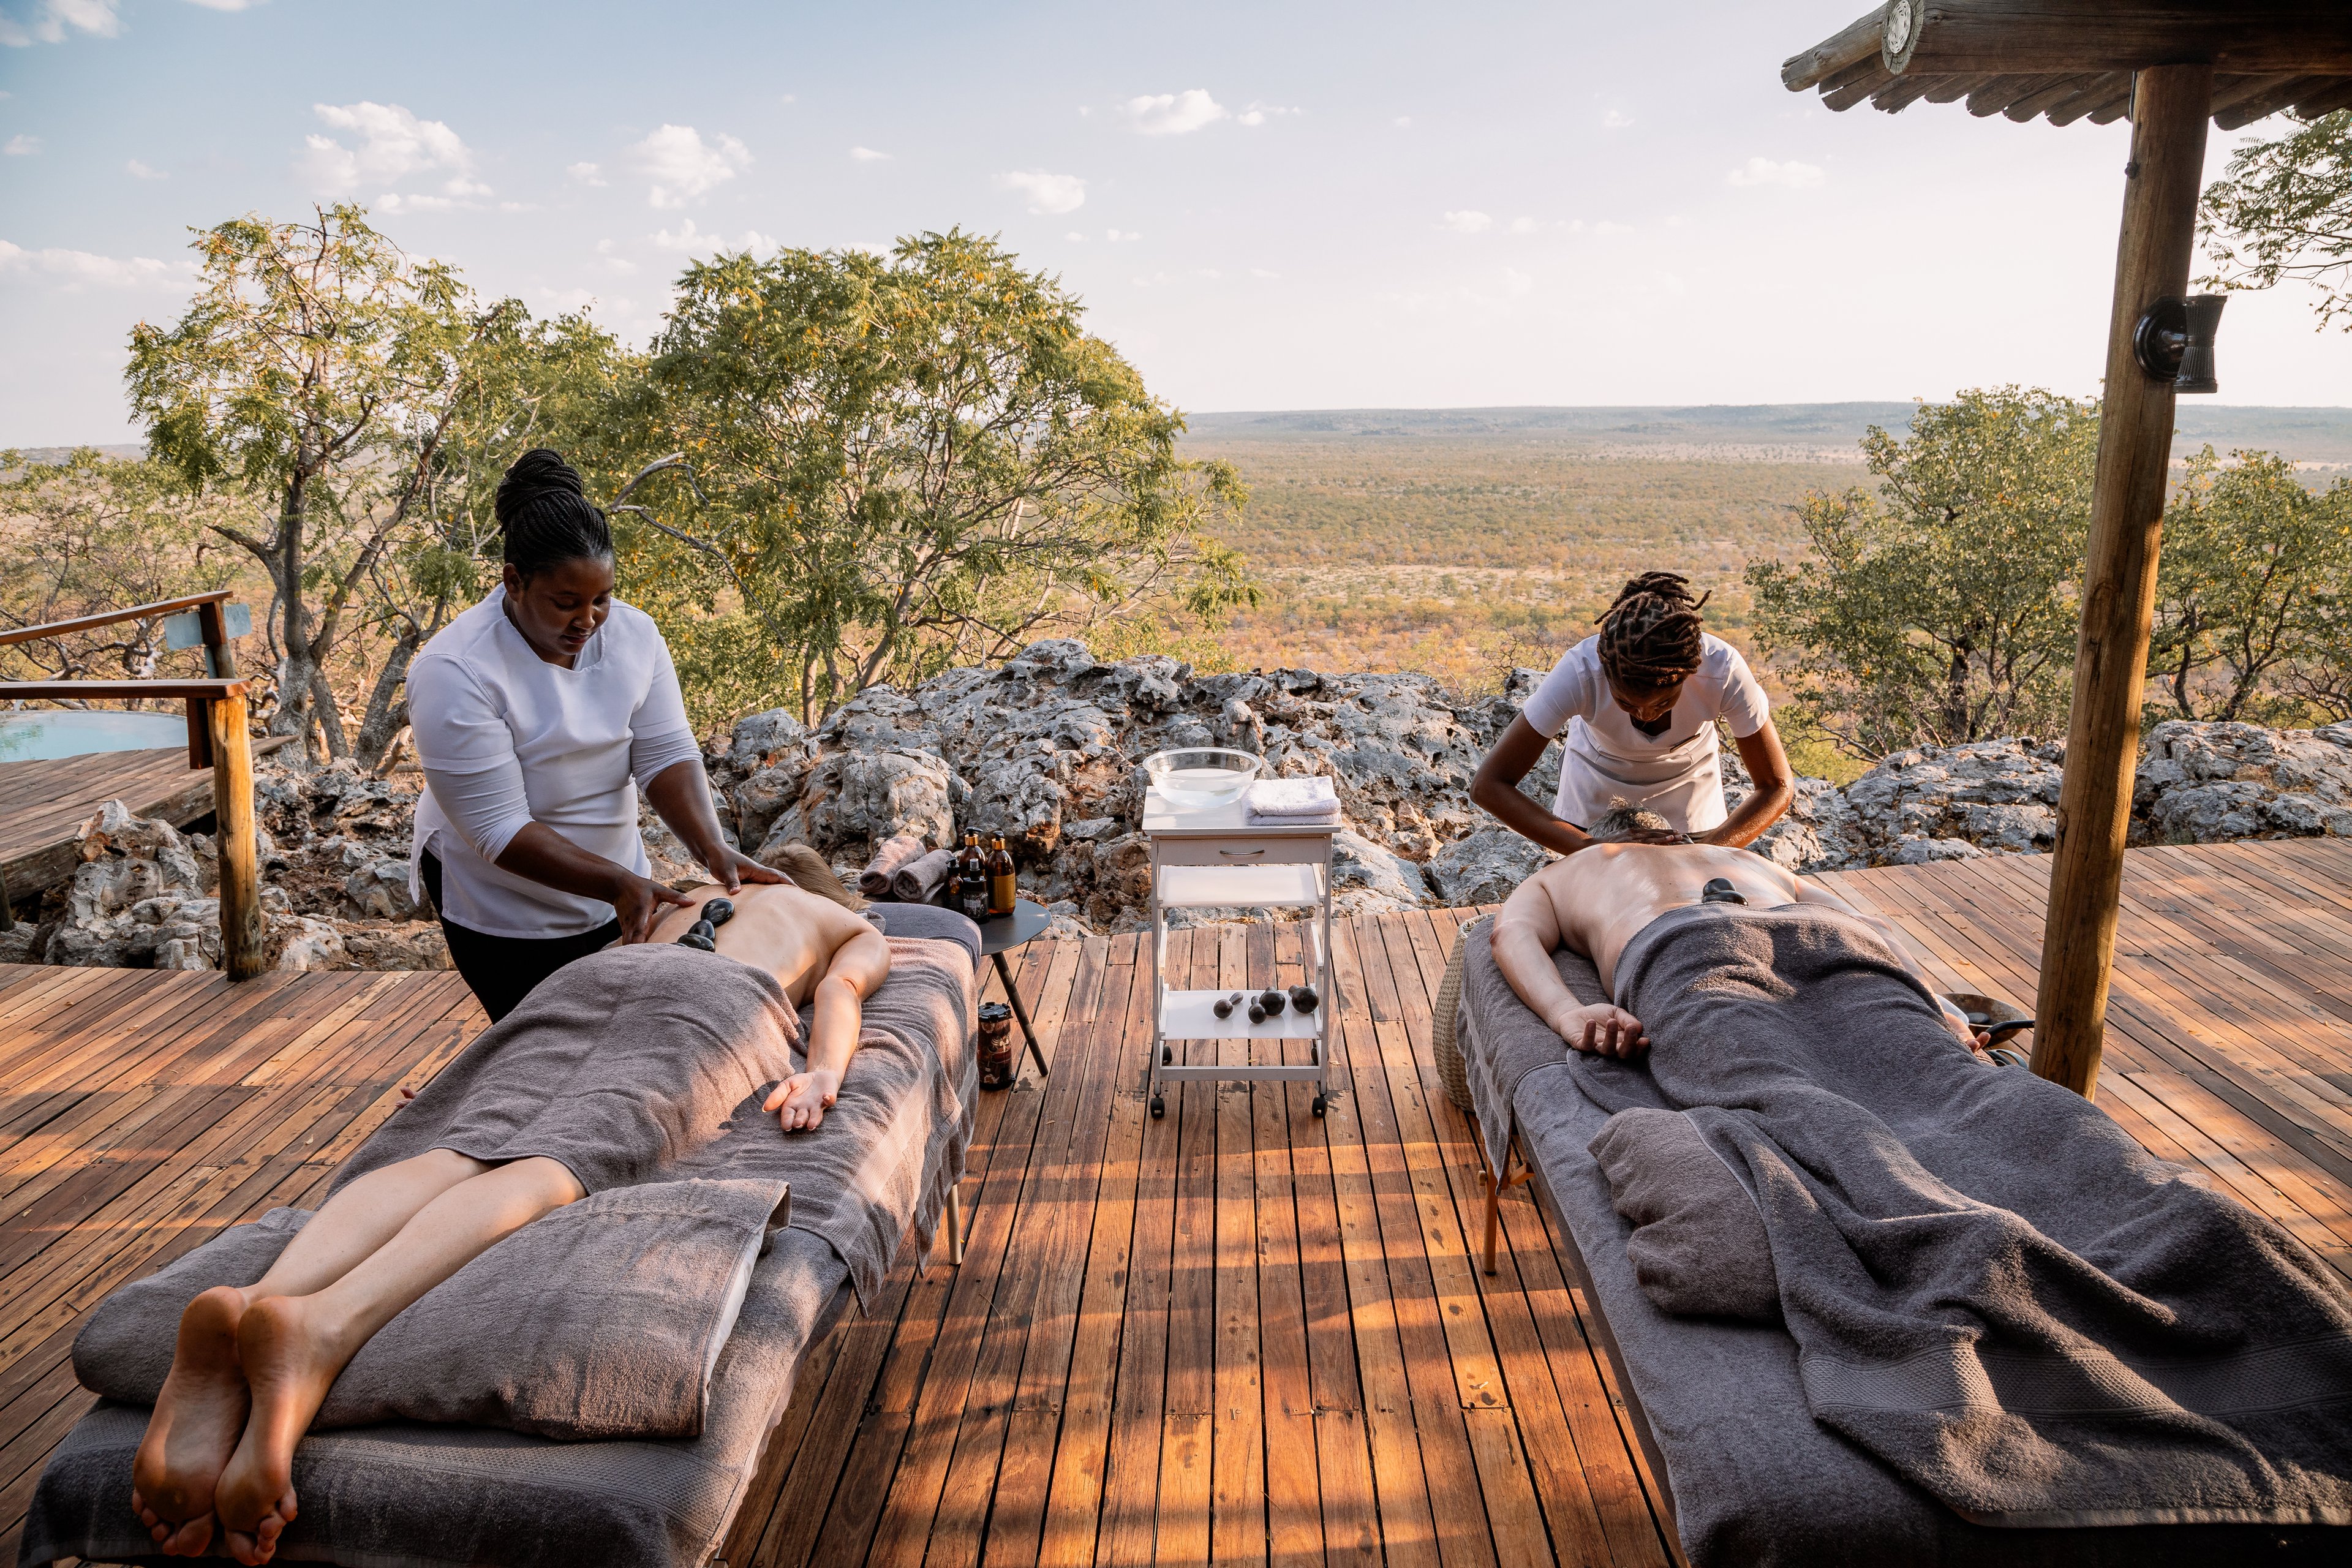 Enhance your well-being with a massage therapy session on the Ongava Lodge spa deck or with in-room treatments at Little Ongava.